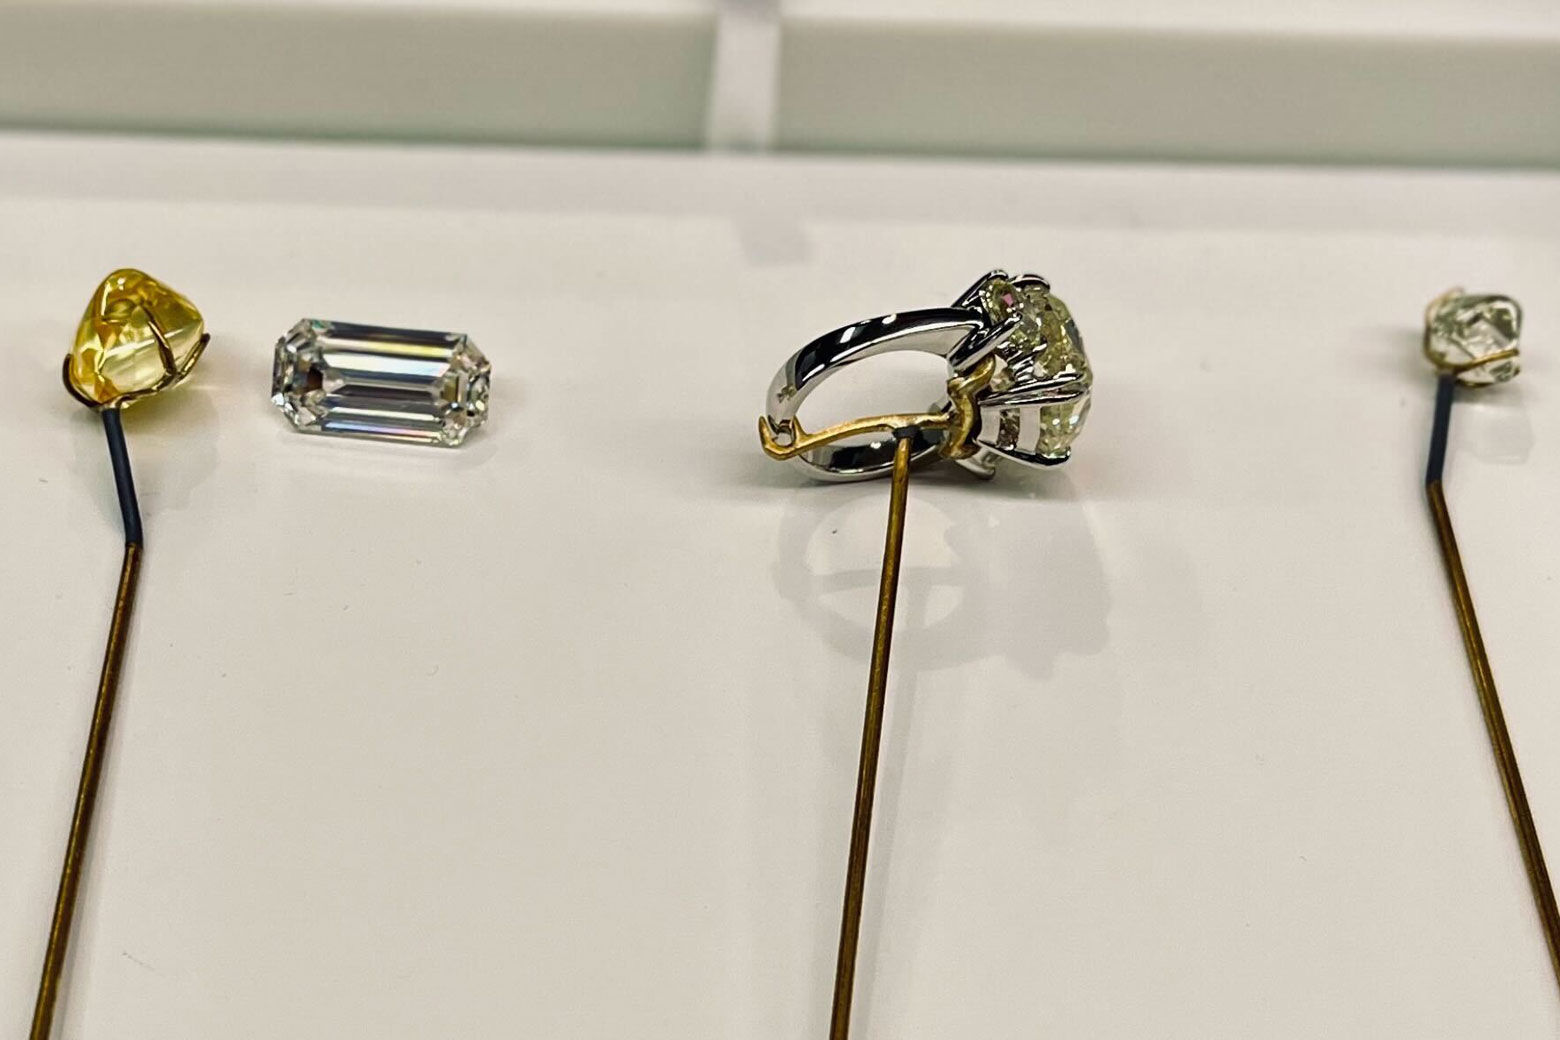 These diamonds are a Natural History Museum's best friend – Daily News